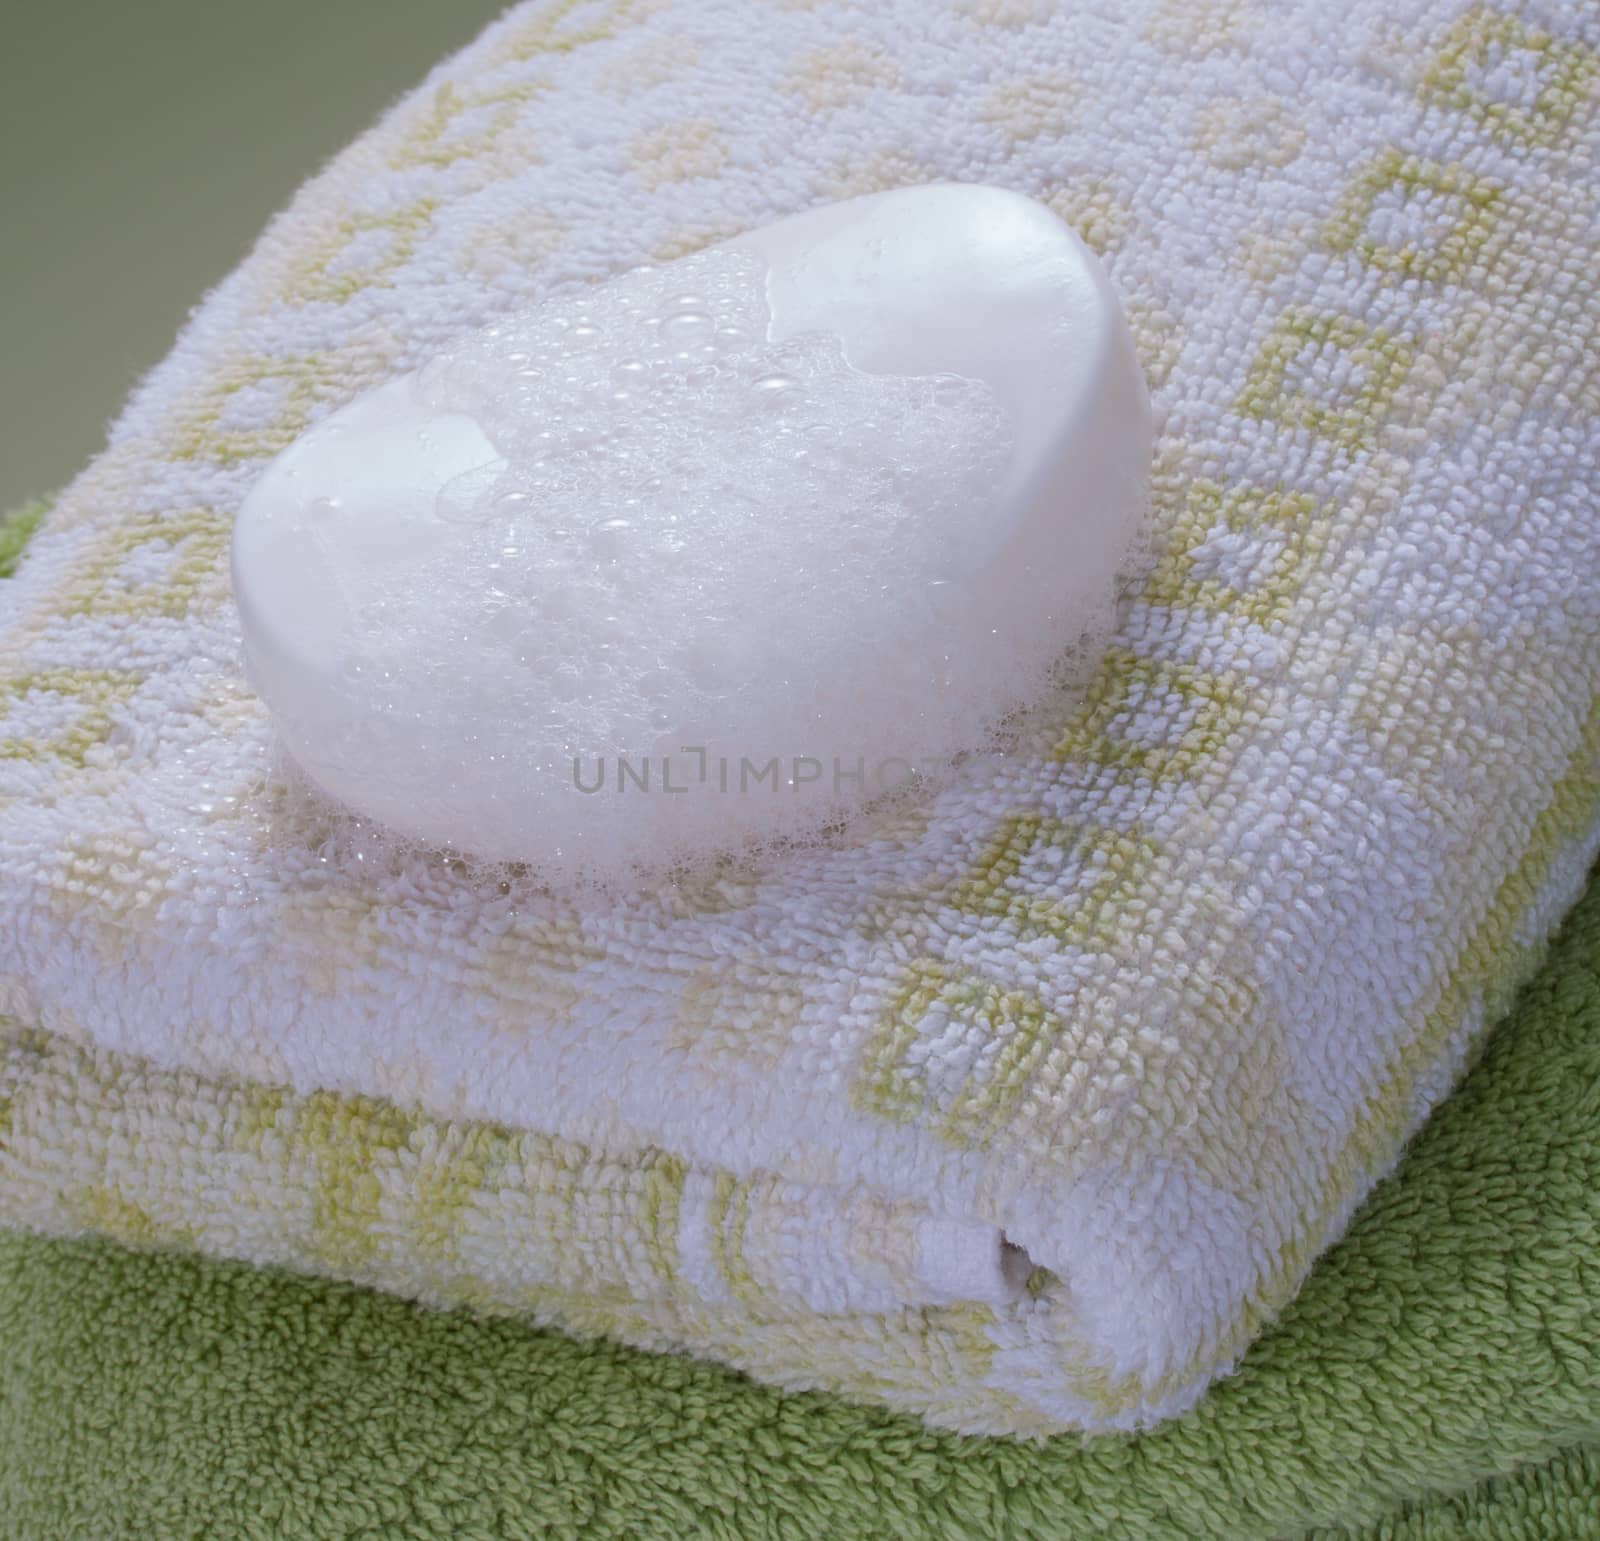 White soap bar on a bath towel by lanalanglois